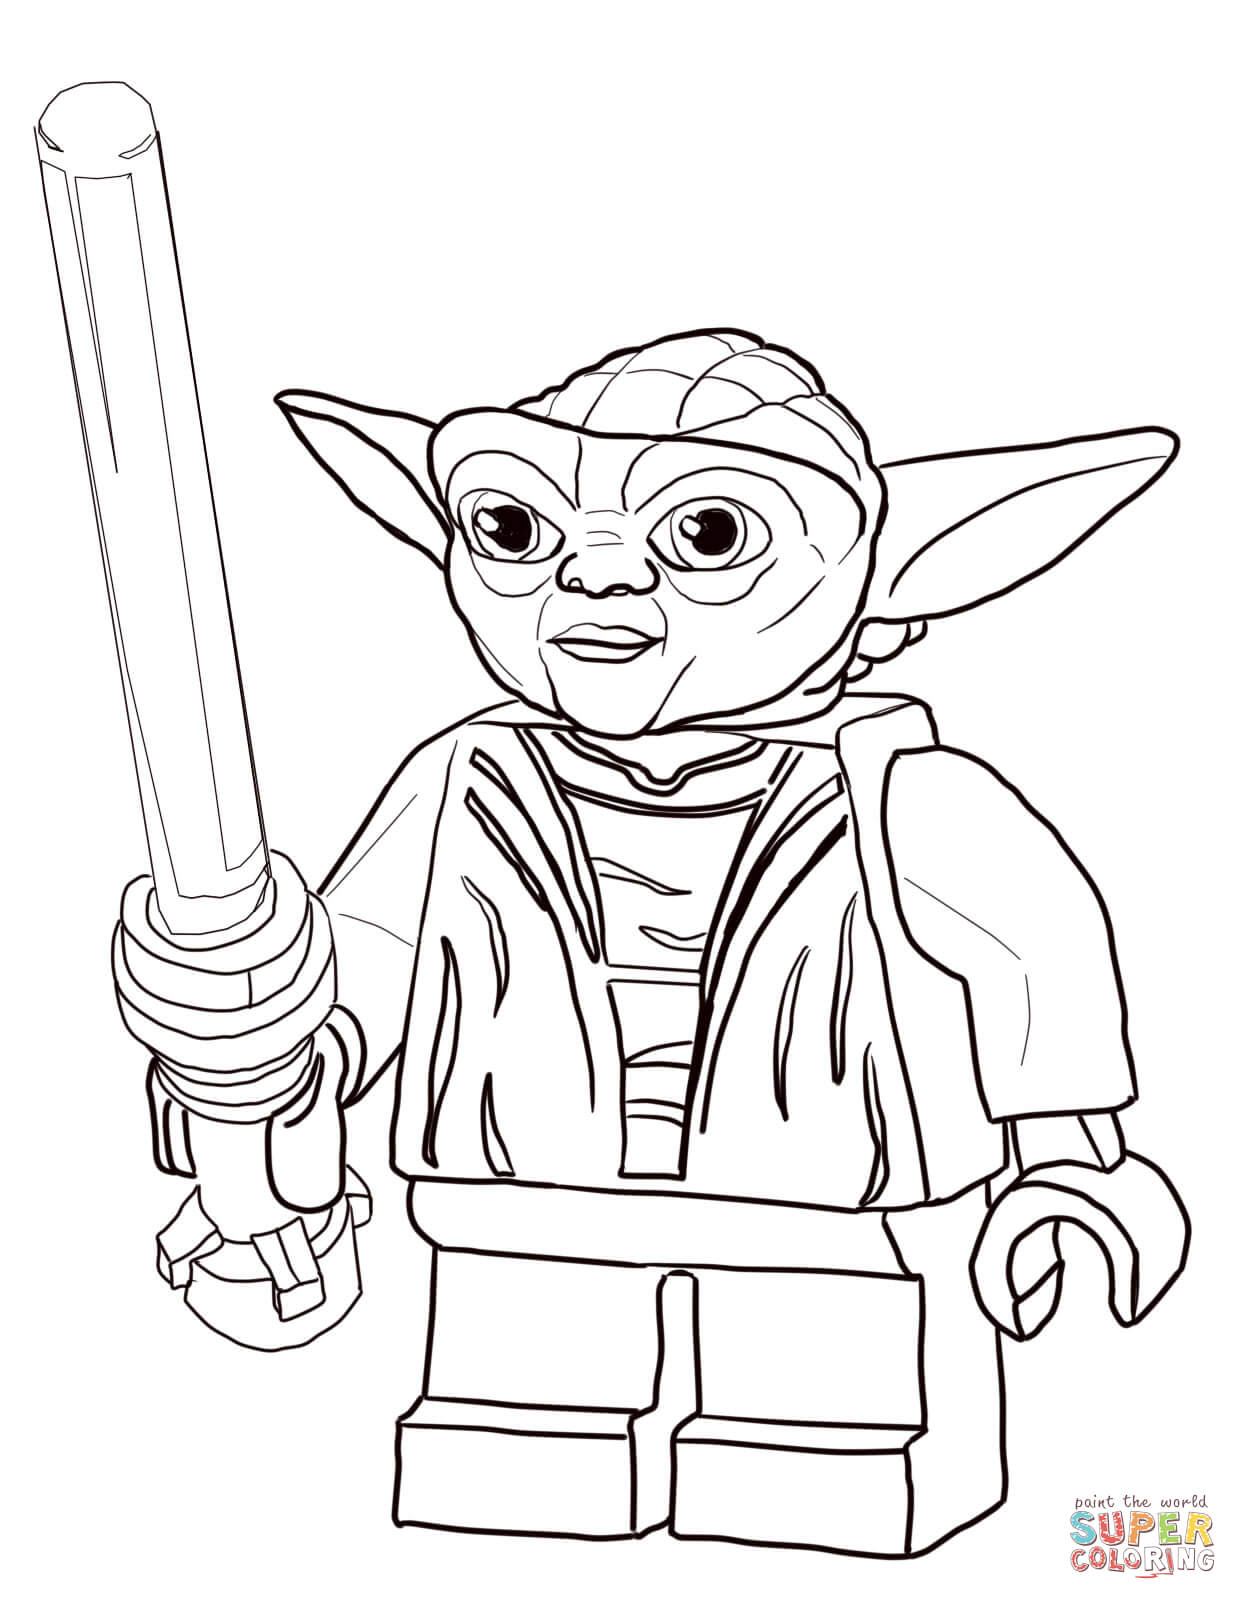 Lego star wars master yoda coloring page free printable coloring pages